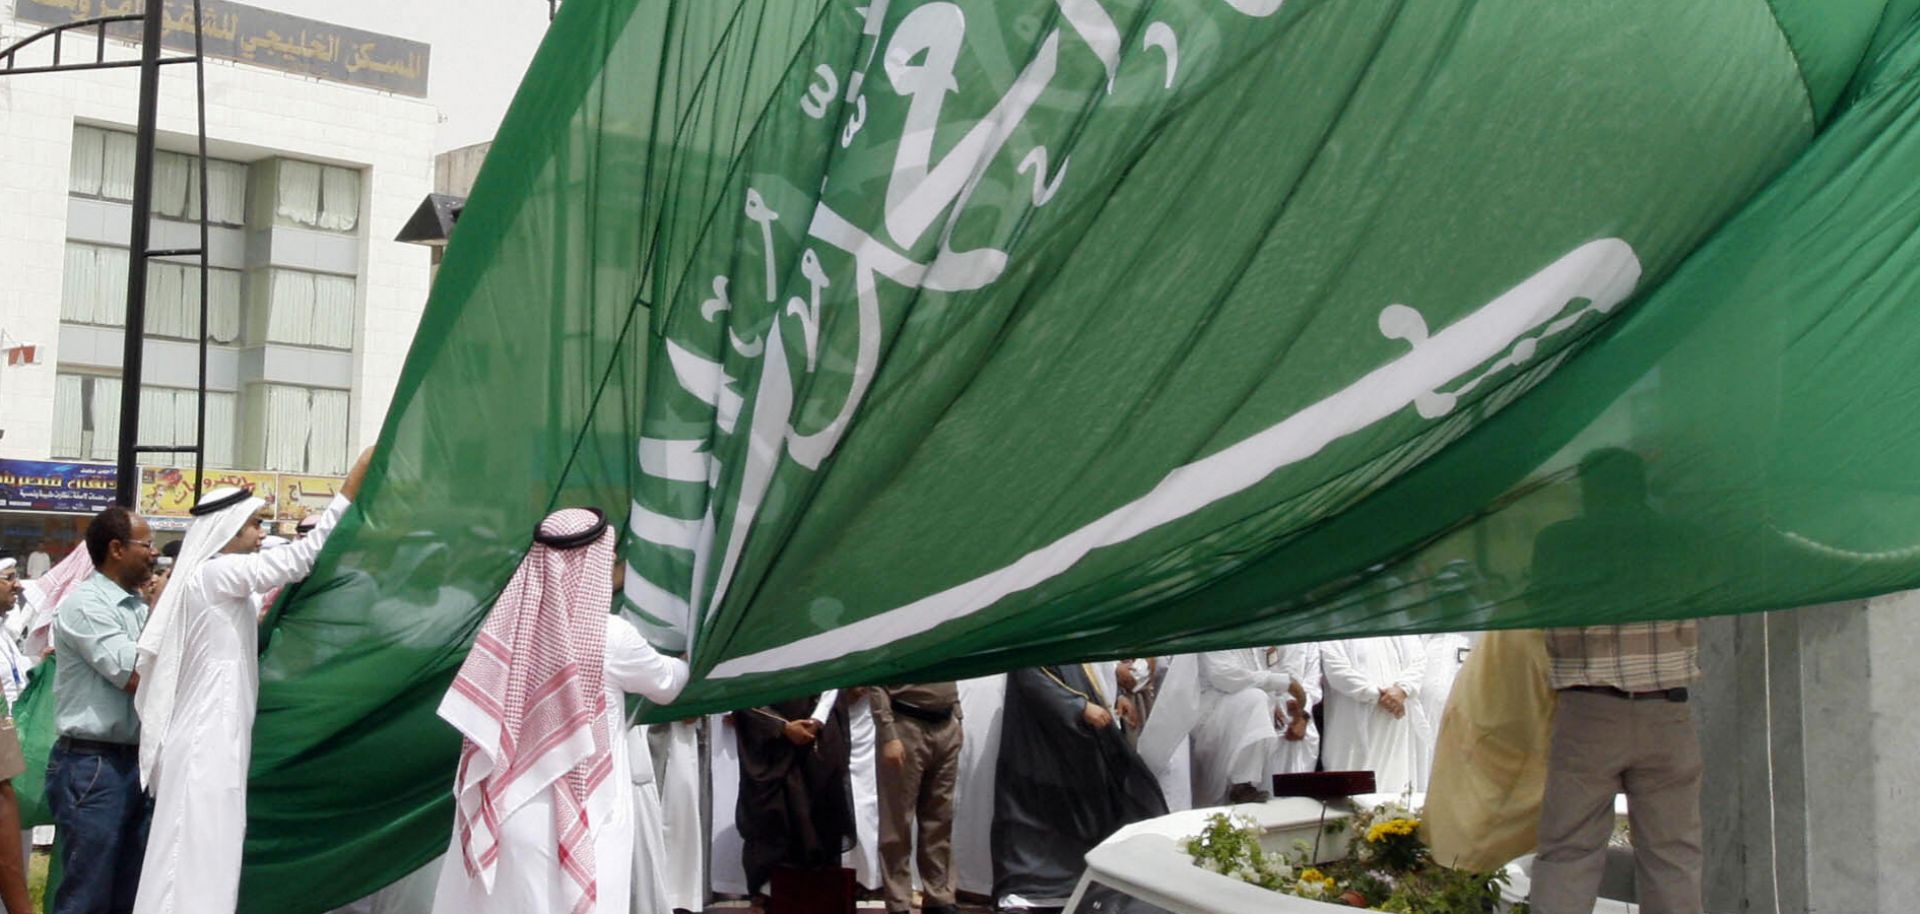 Saudi men unfurl a giant Saudi national flag during a ceremony to raise the highest flag in the country in the eastern city of Dammam on June 17, 2008.